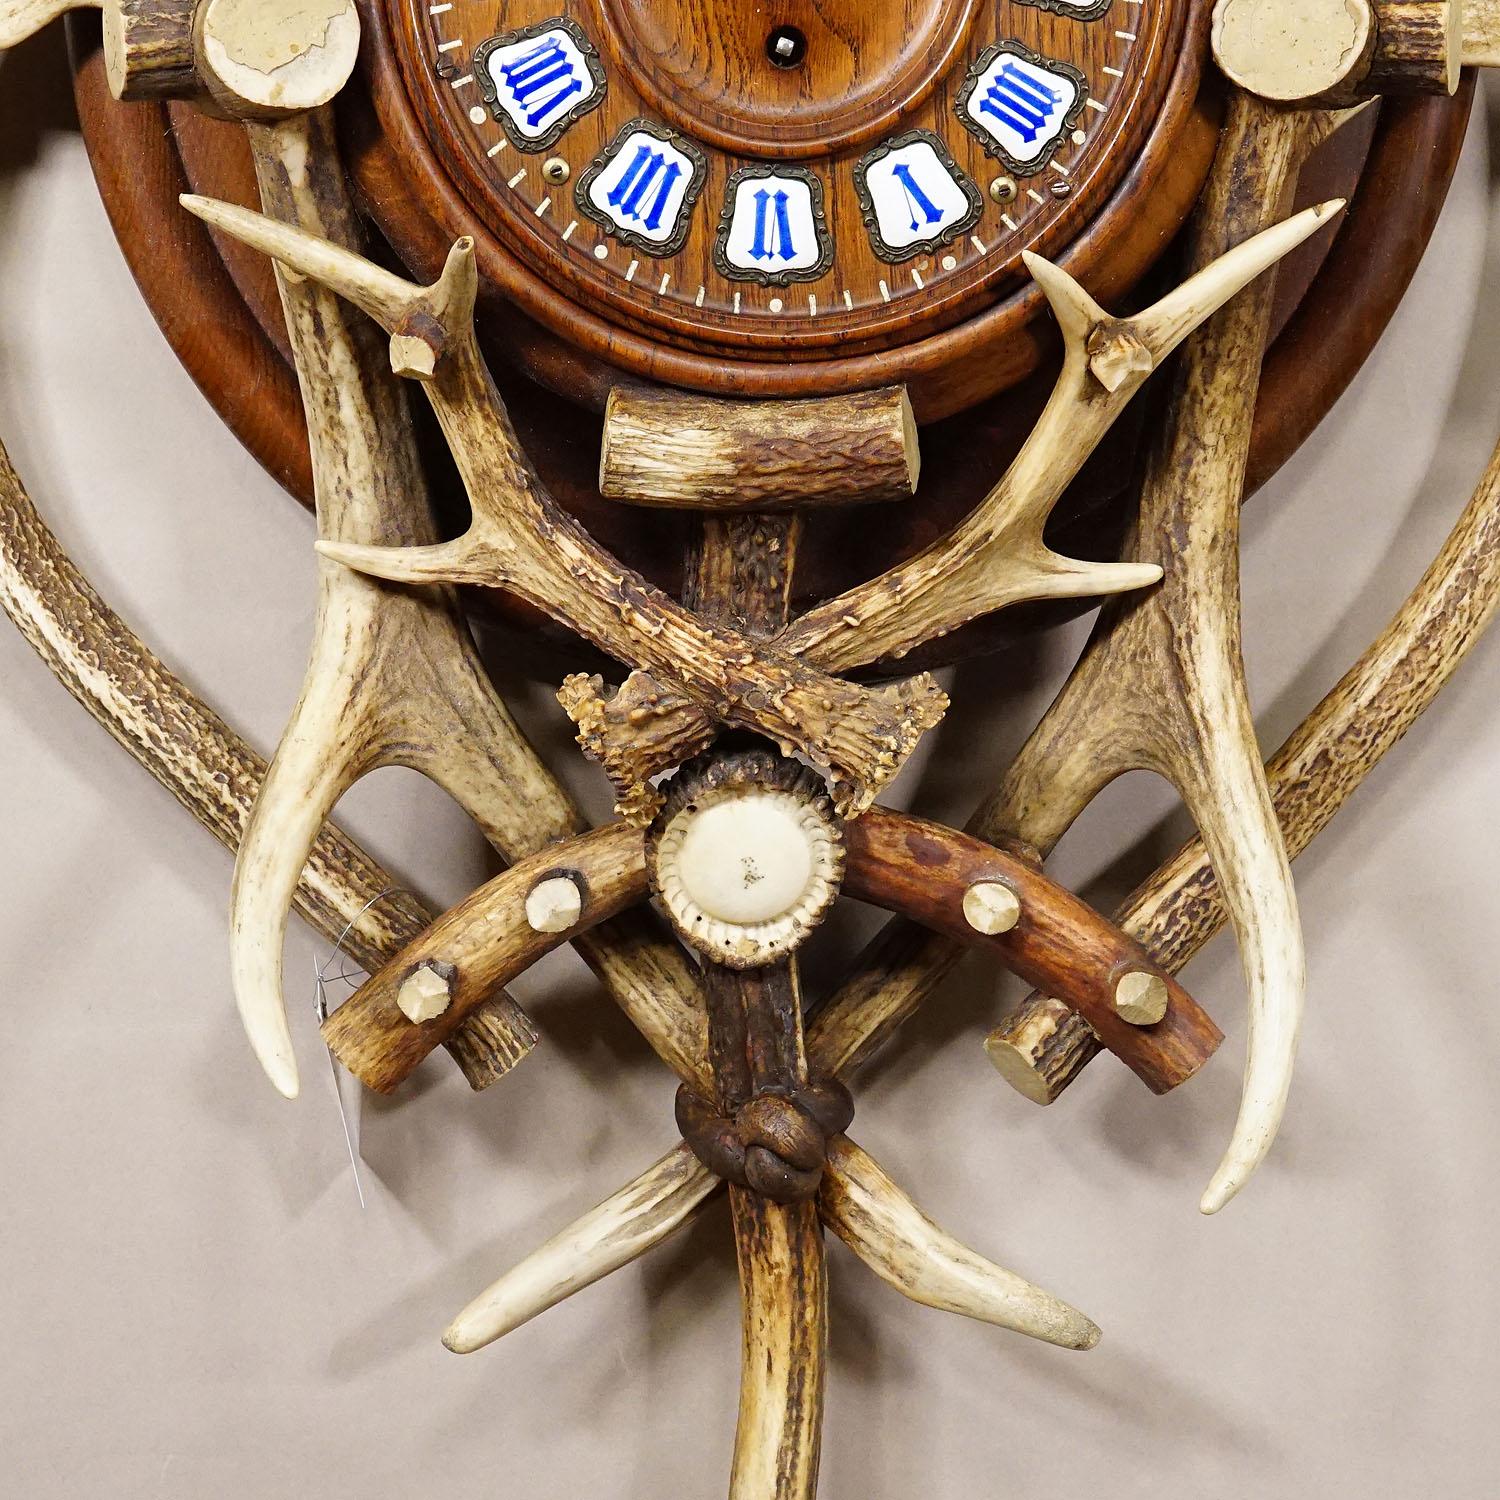 Black Forest Antique Cabin Antler Wall Clock with Deer Head Austria ca. 1900 For Sale